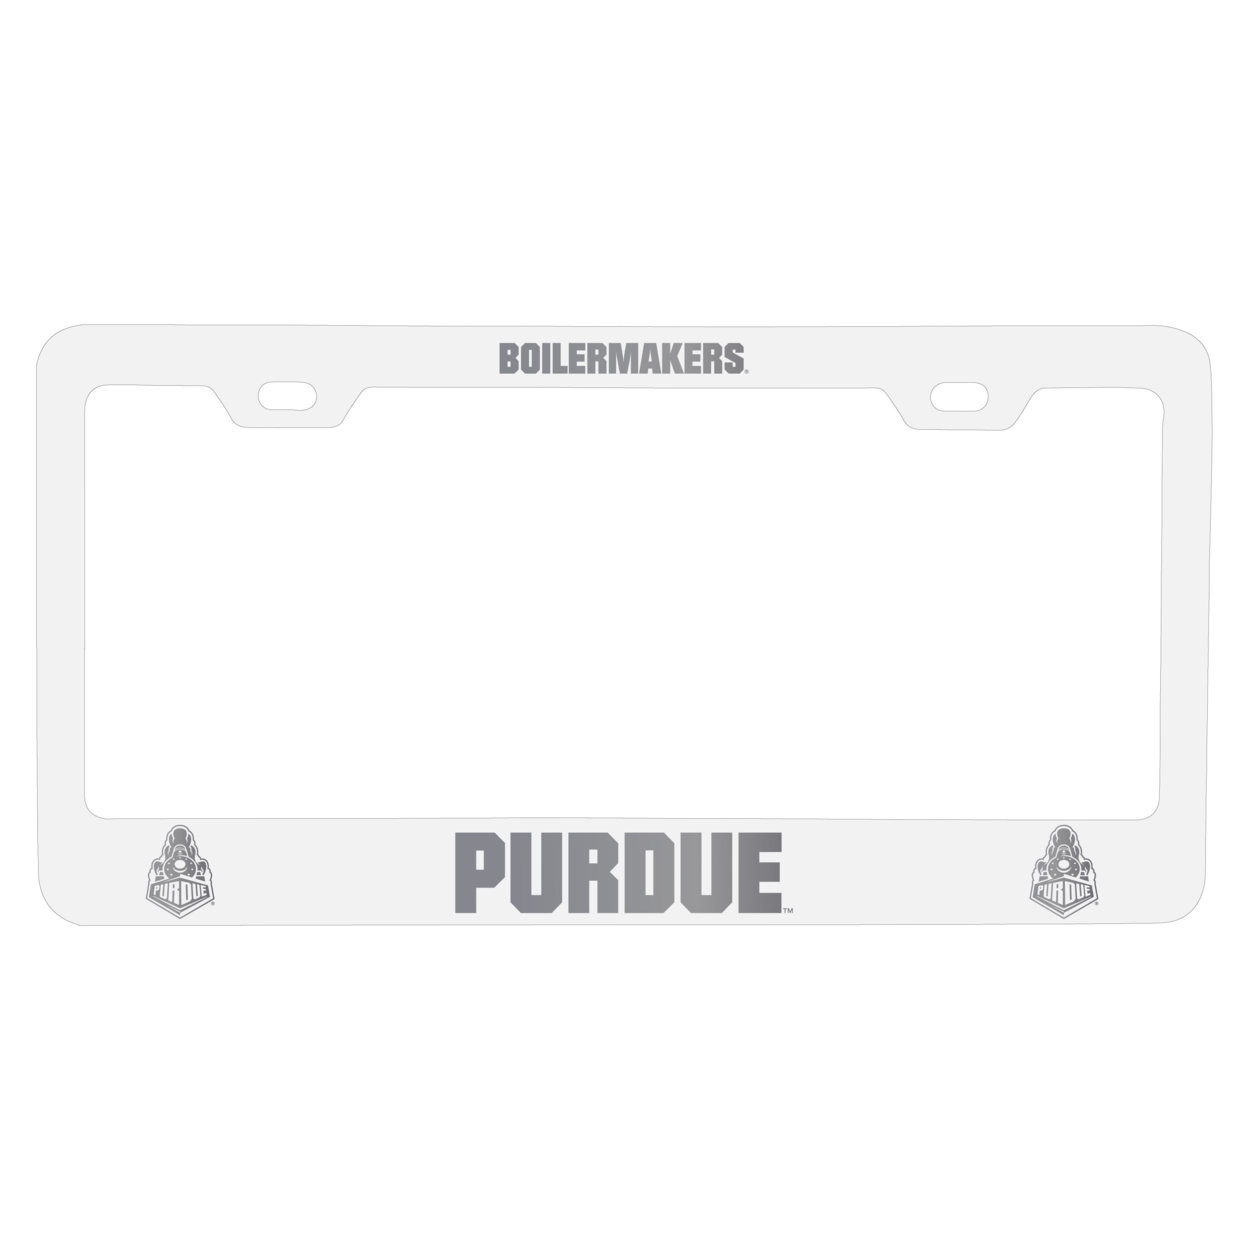 Purdue Boilermakers Laser Engraved Metal License Plate Frame - Choose Your Color - White